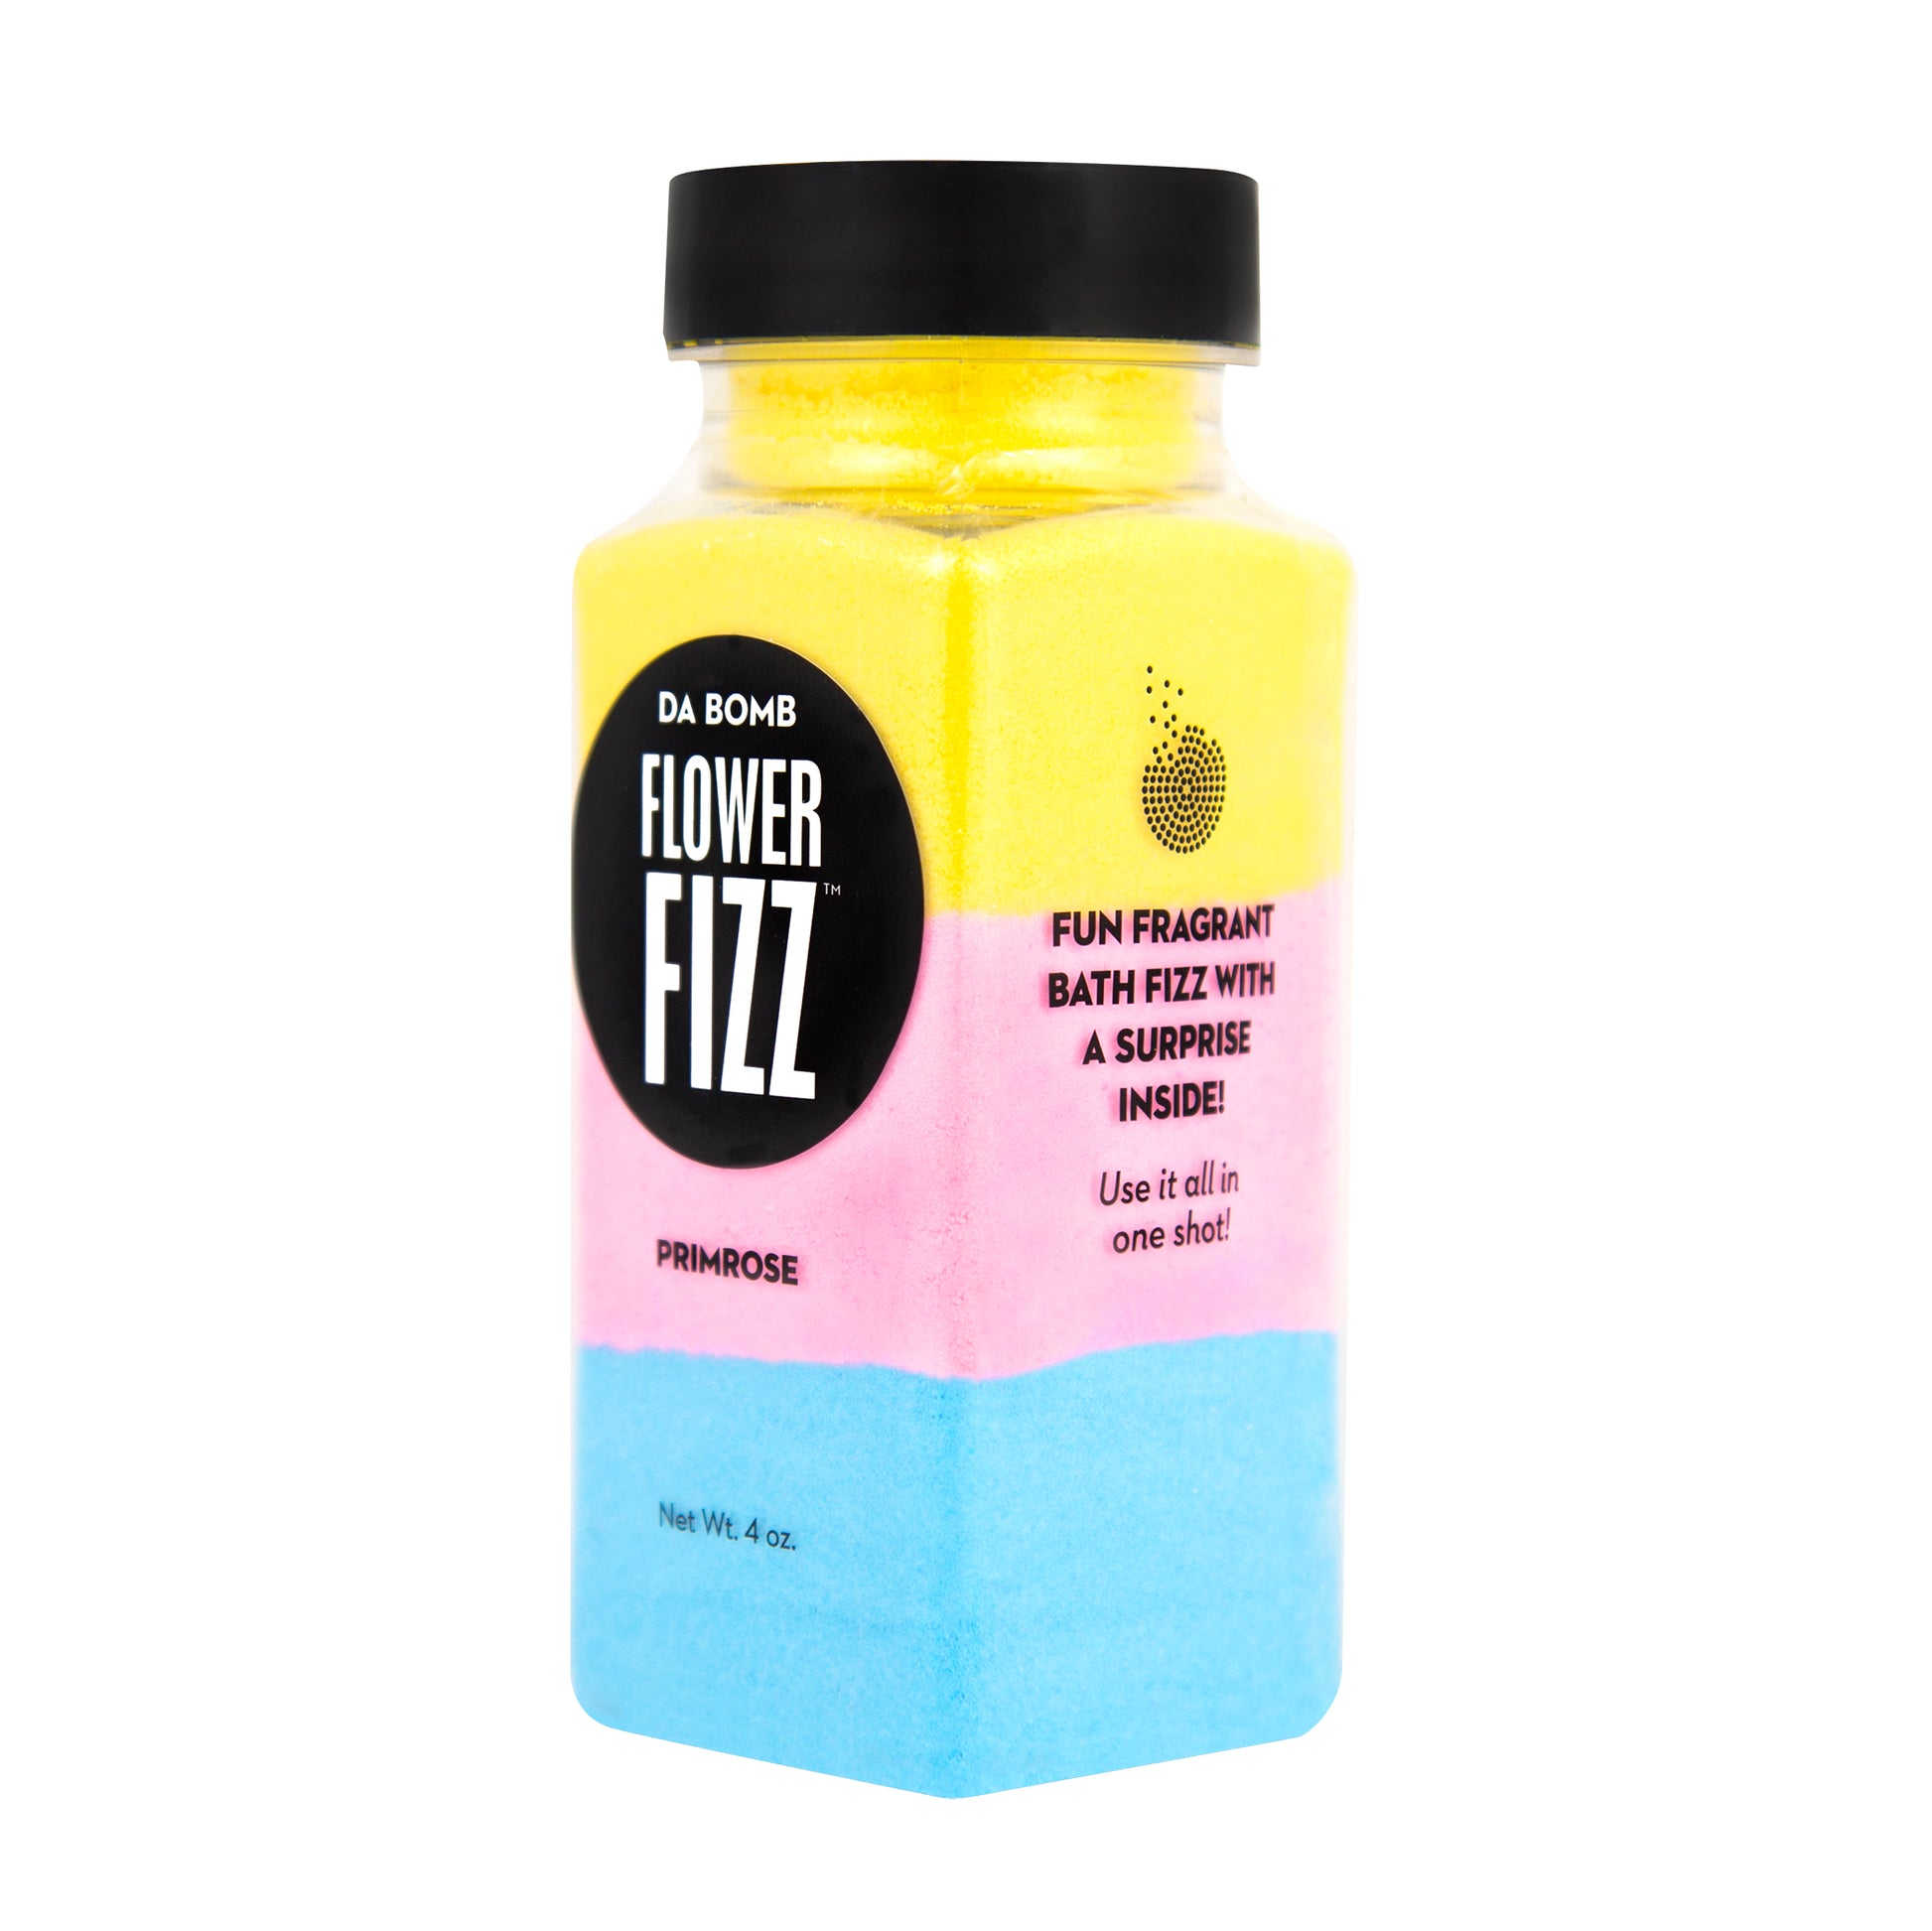 Small, clear plastic jar containing color block blue, pink and yellow bath fizz that smells like primrose. Jar contains a fun surprise.